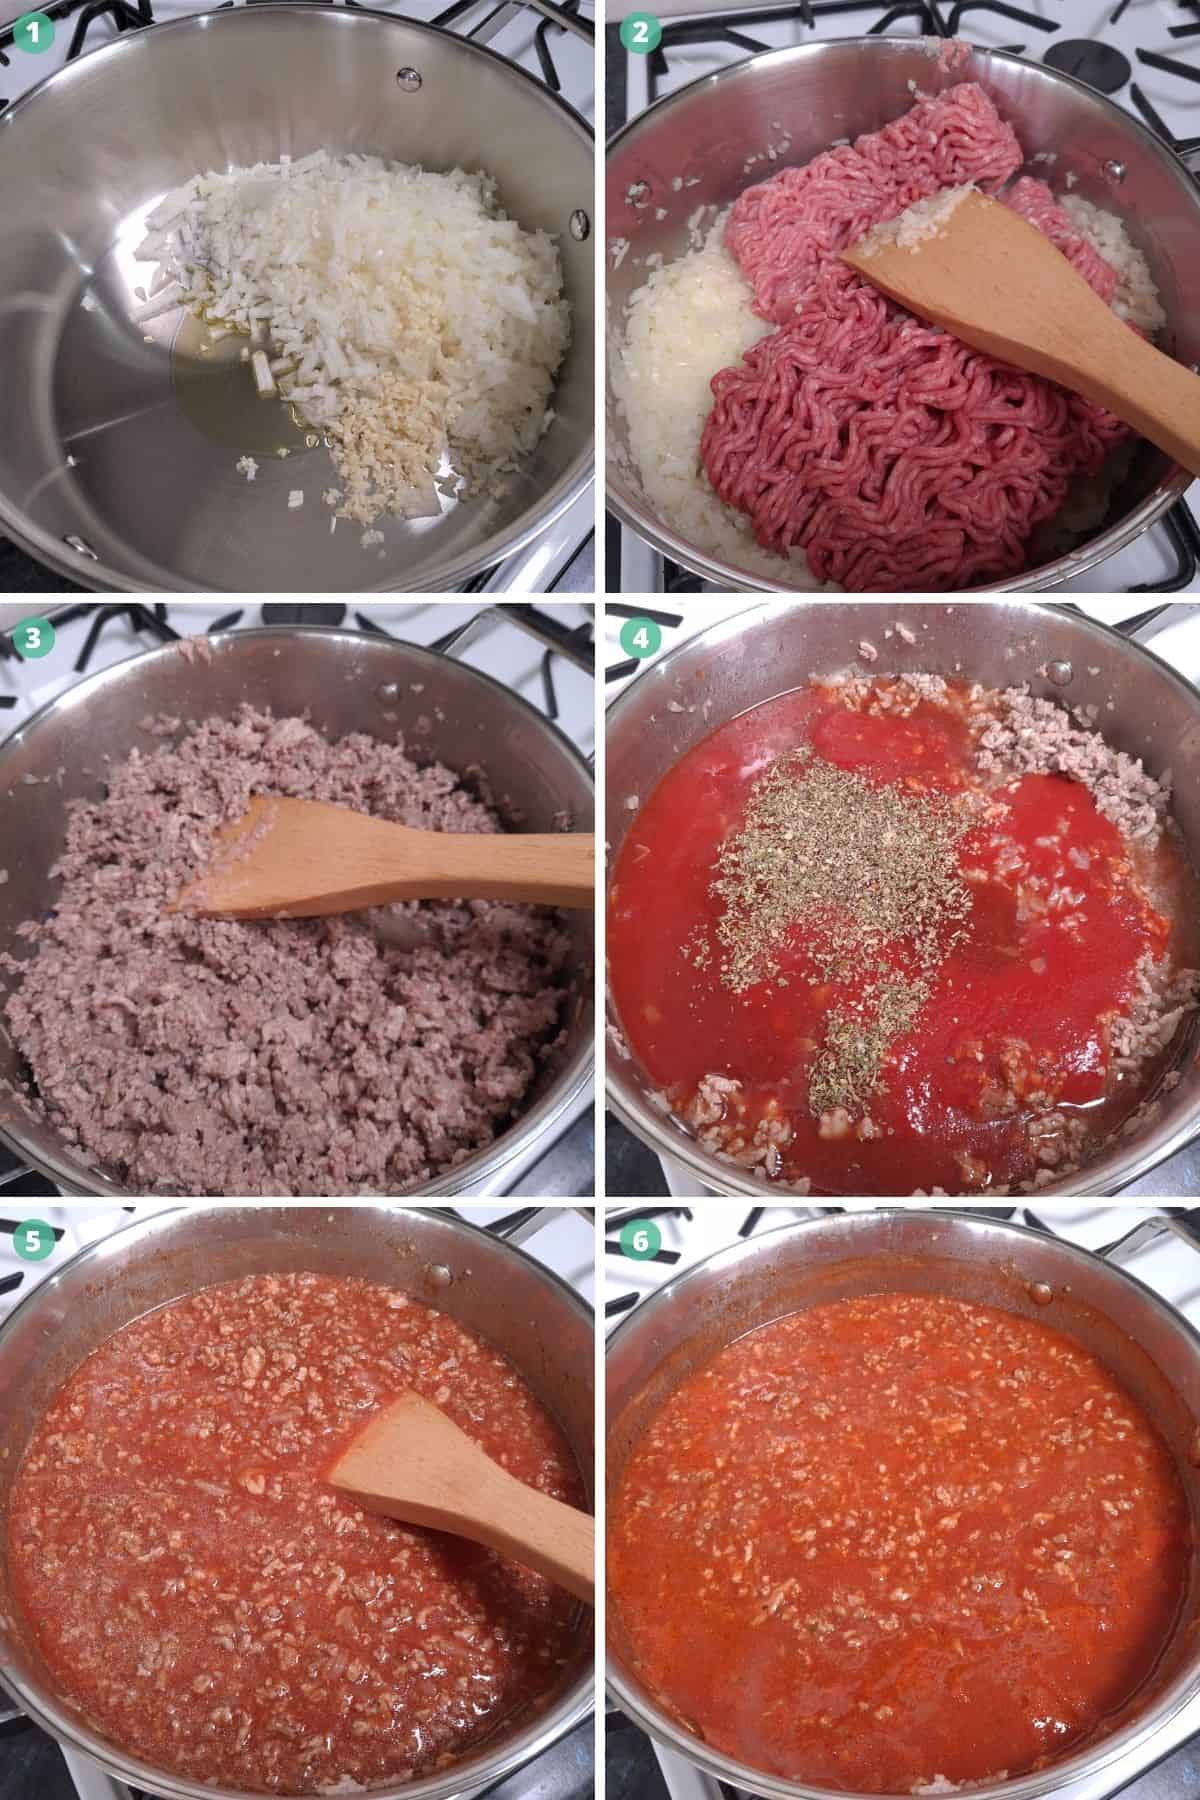 image-for-cooking-the-bolognese-for-weber-q-beef-and-pork-lasagna